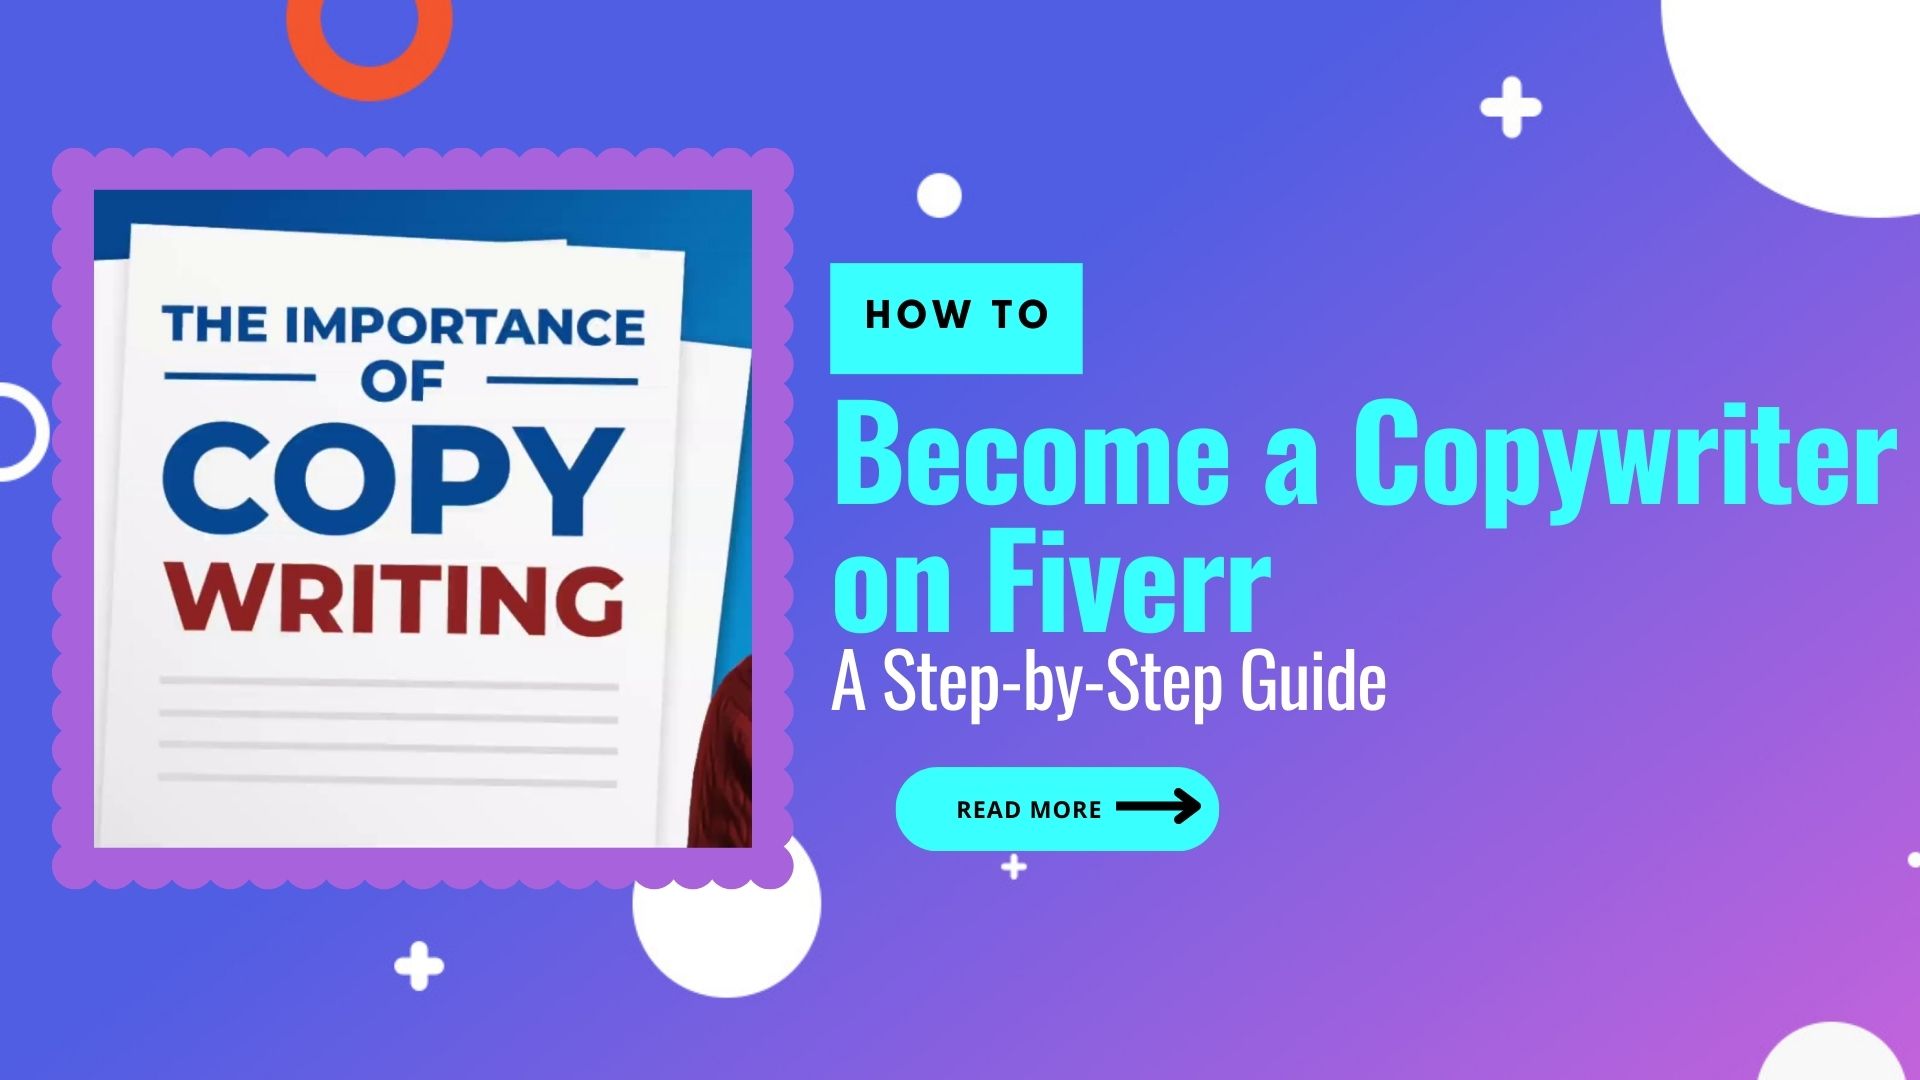 How to Become a Copywriter on Fiverr: A Step-by-Step Guide